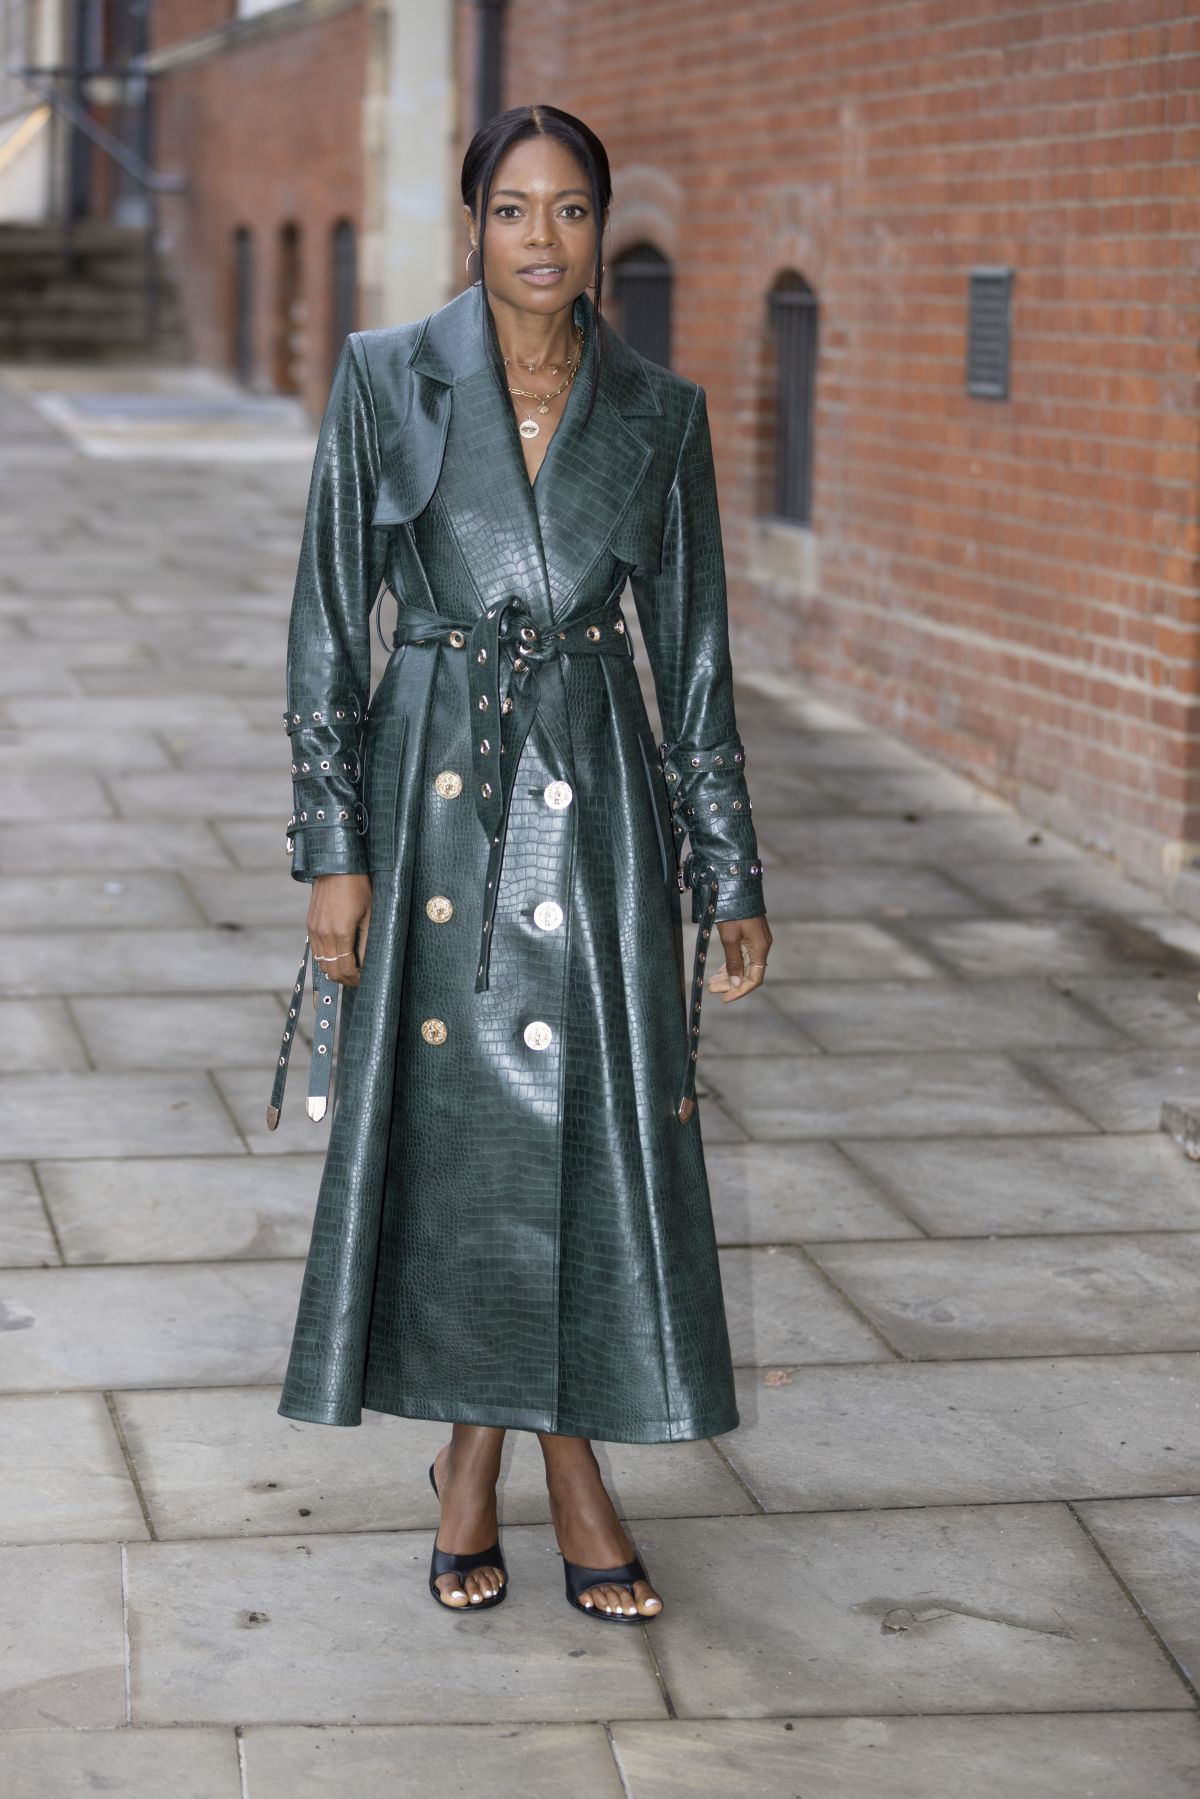 Naomie Harris Arrives at Mithridate Pre-LFW Fashion Show in London 3